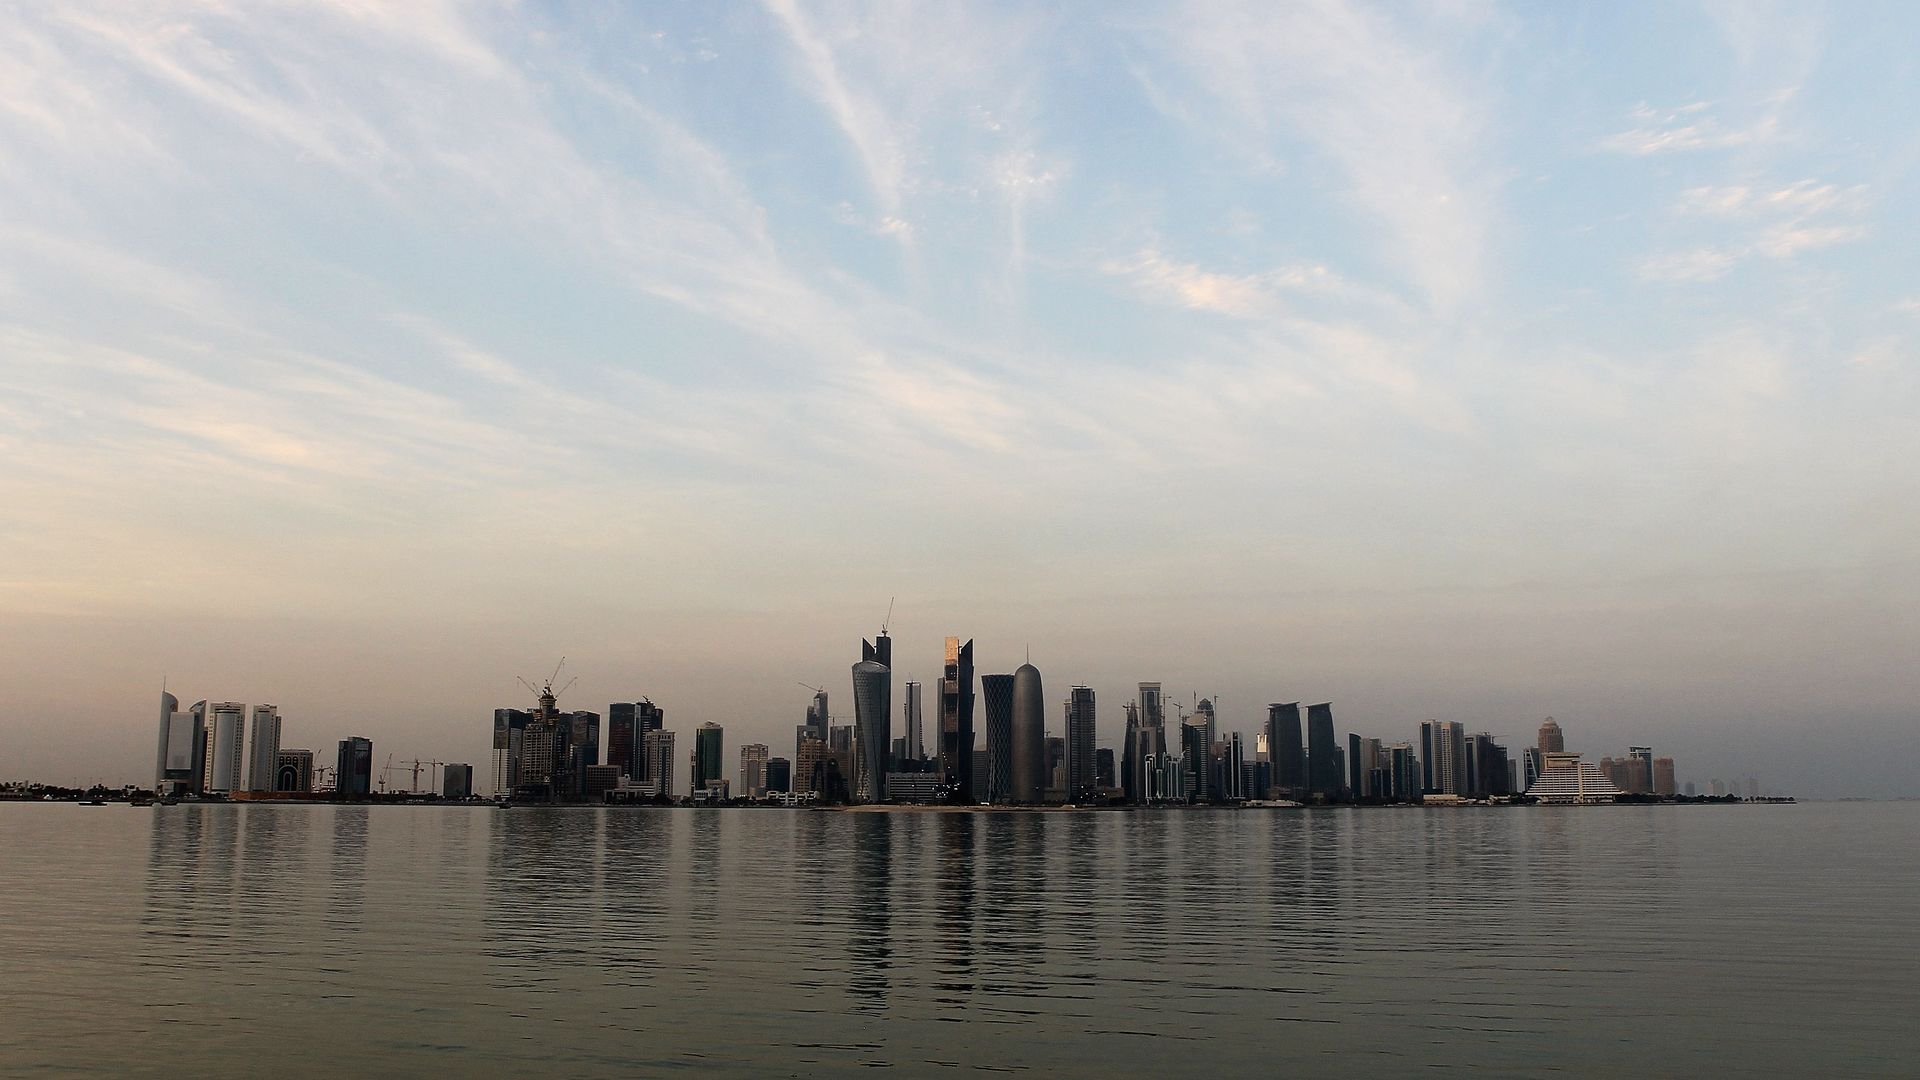  View of the skyline of the West Bay area in Doha is taken on January 4, 2011 in Doha, Qatar.